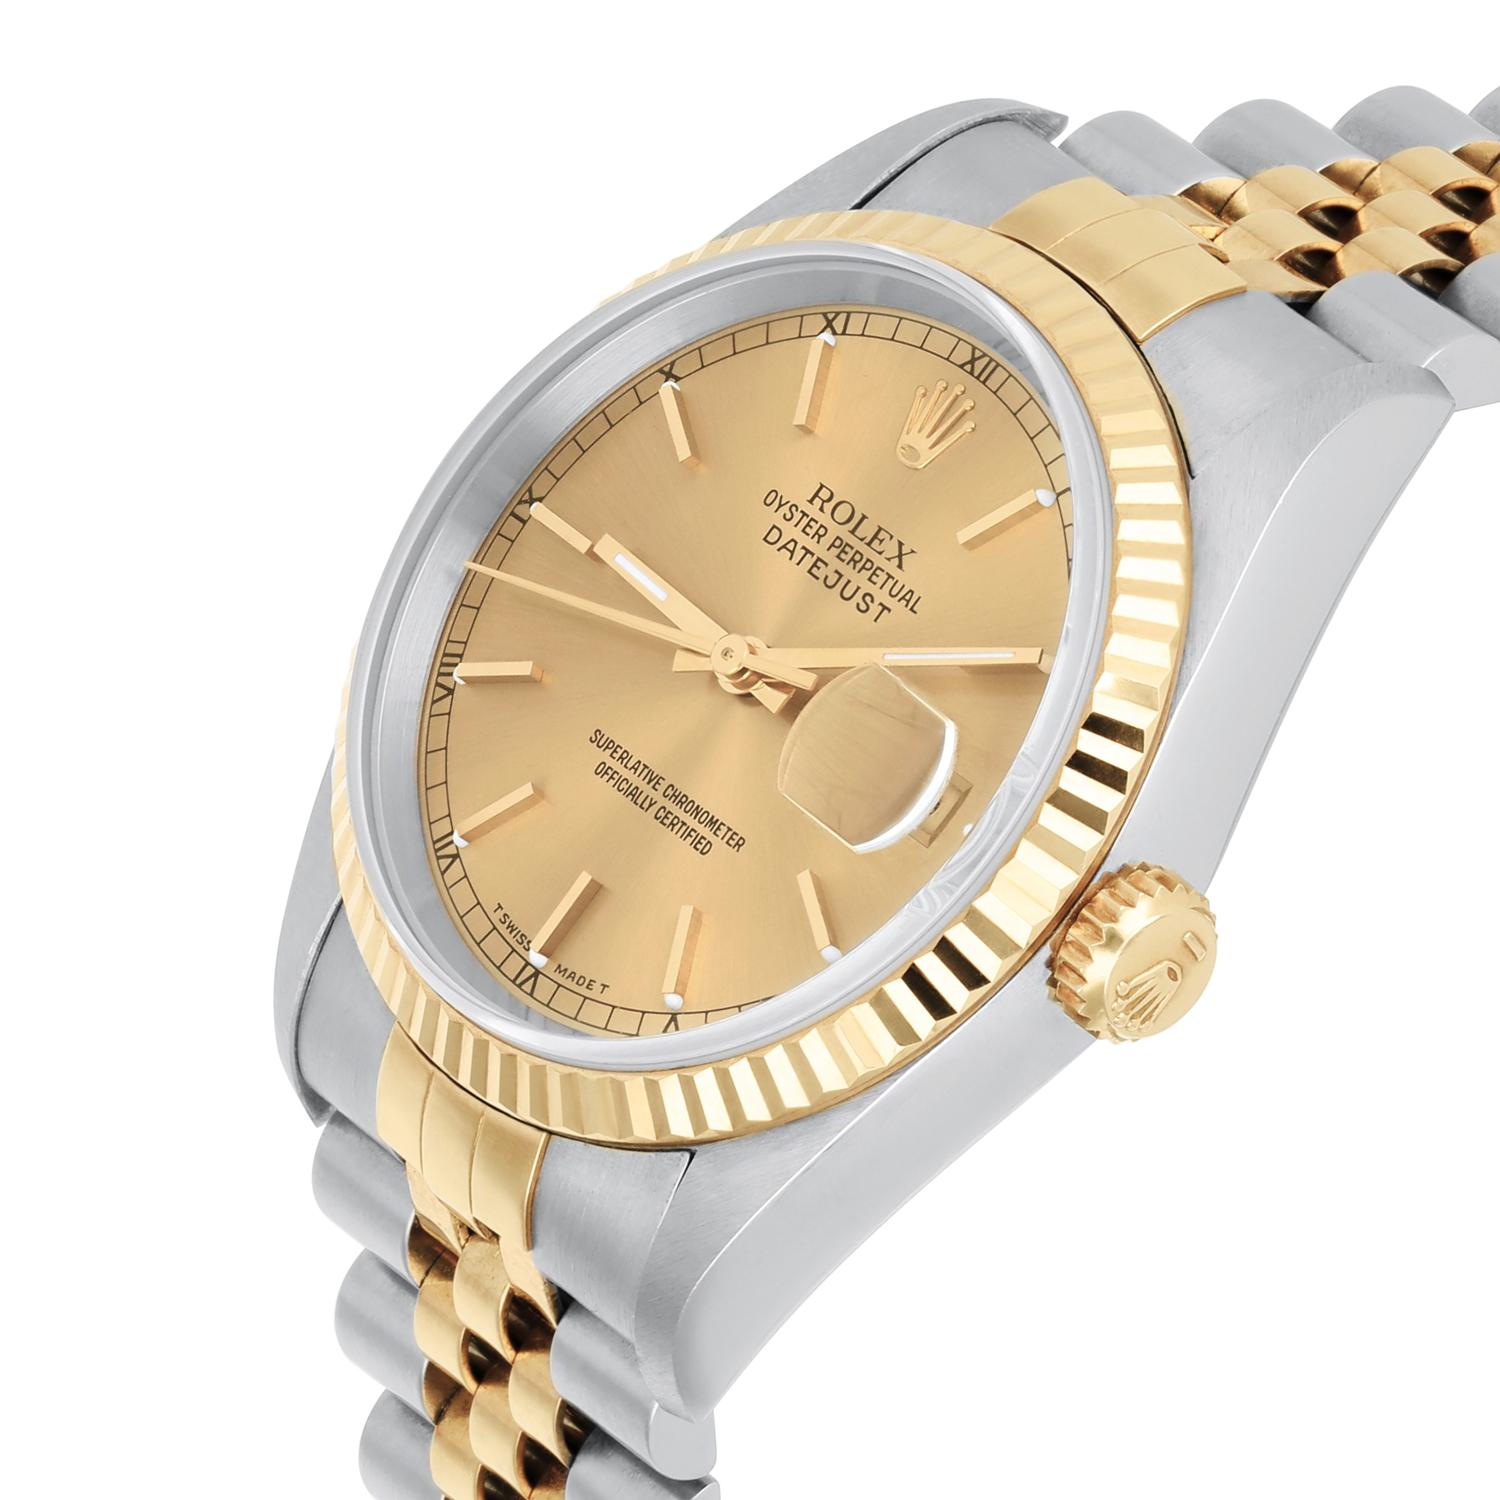 Rolex Datejust 36 Two Tone Champagne Dial Jubilee Band 16233 Circa 1995 In Excellent Condition For Sale In New York, NY